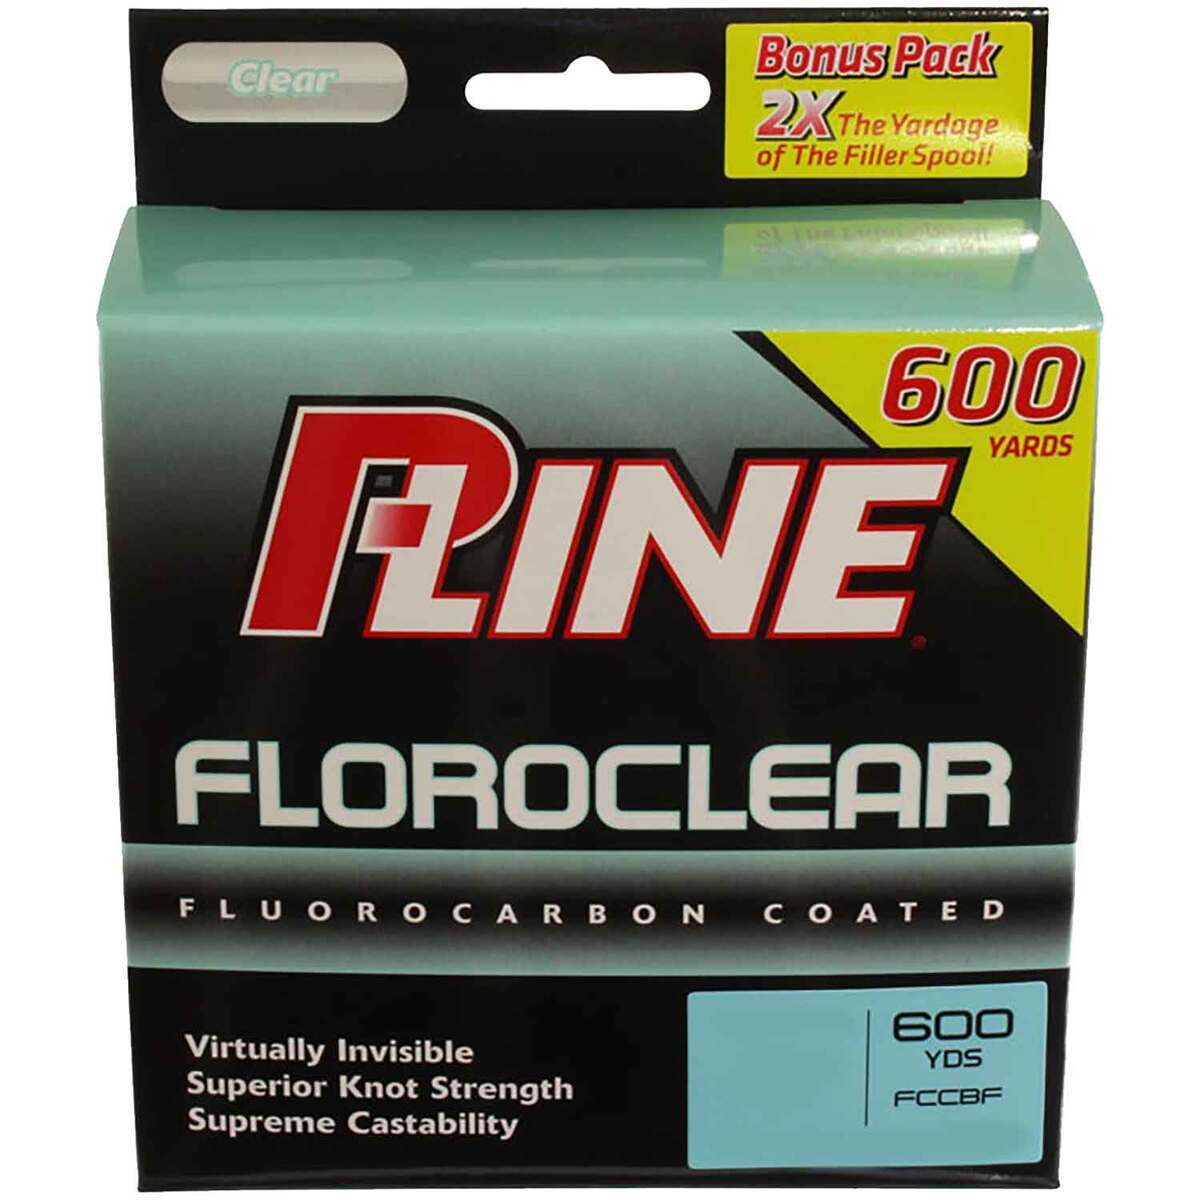 P-Line Floroclear Fluorocarbon Coated Line - Clear - 12 lb 600 yds.